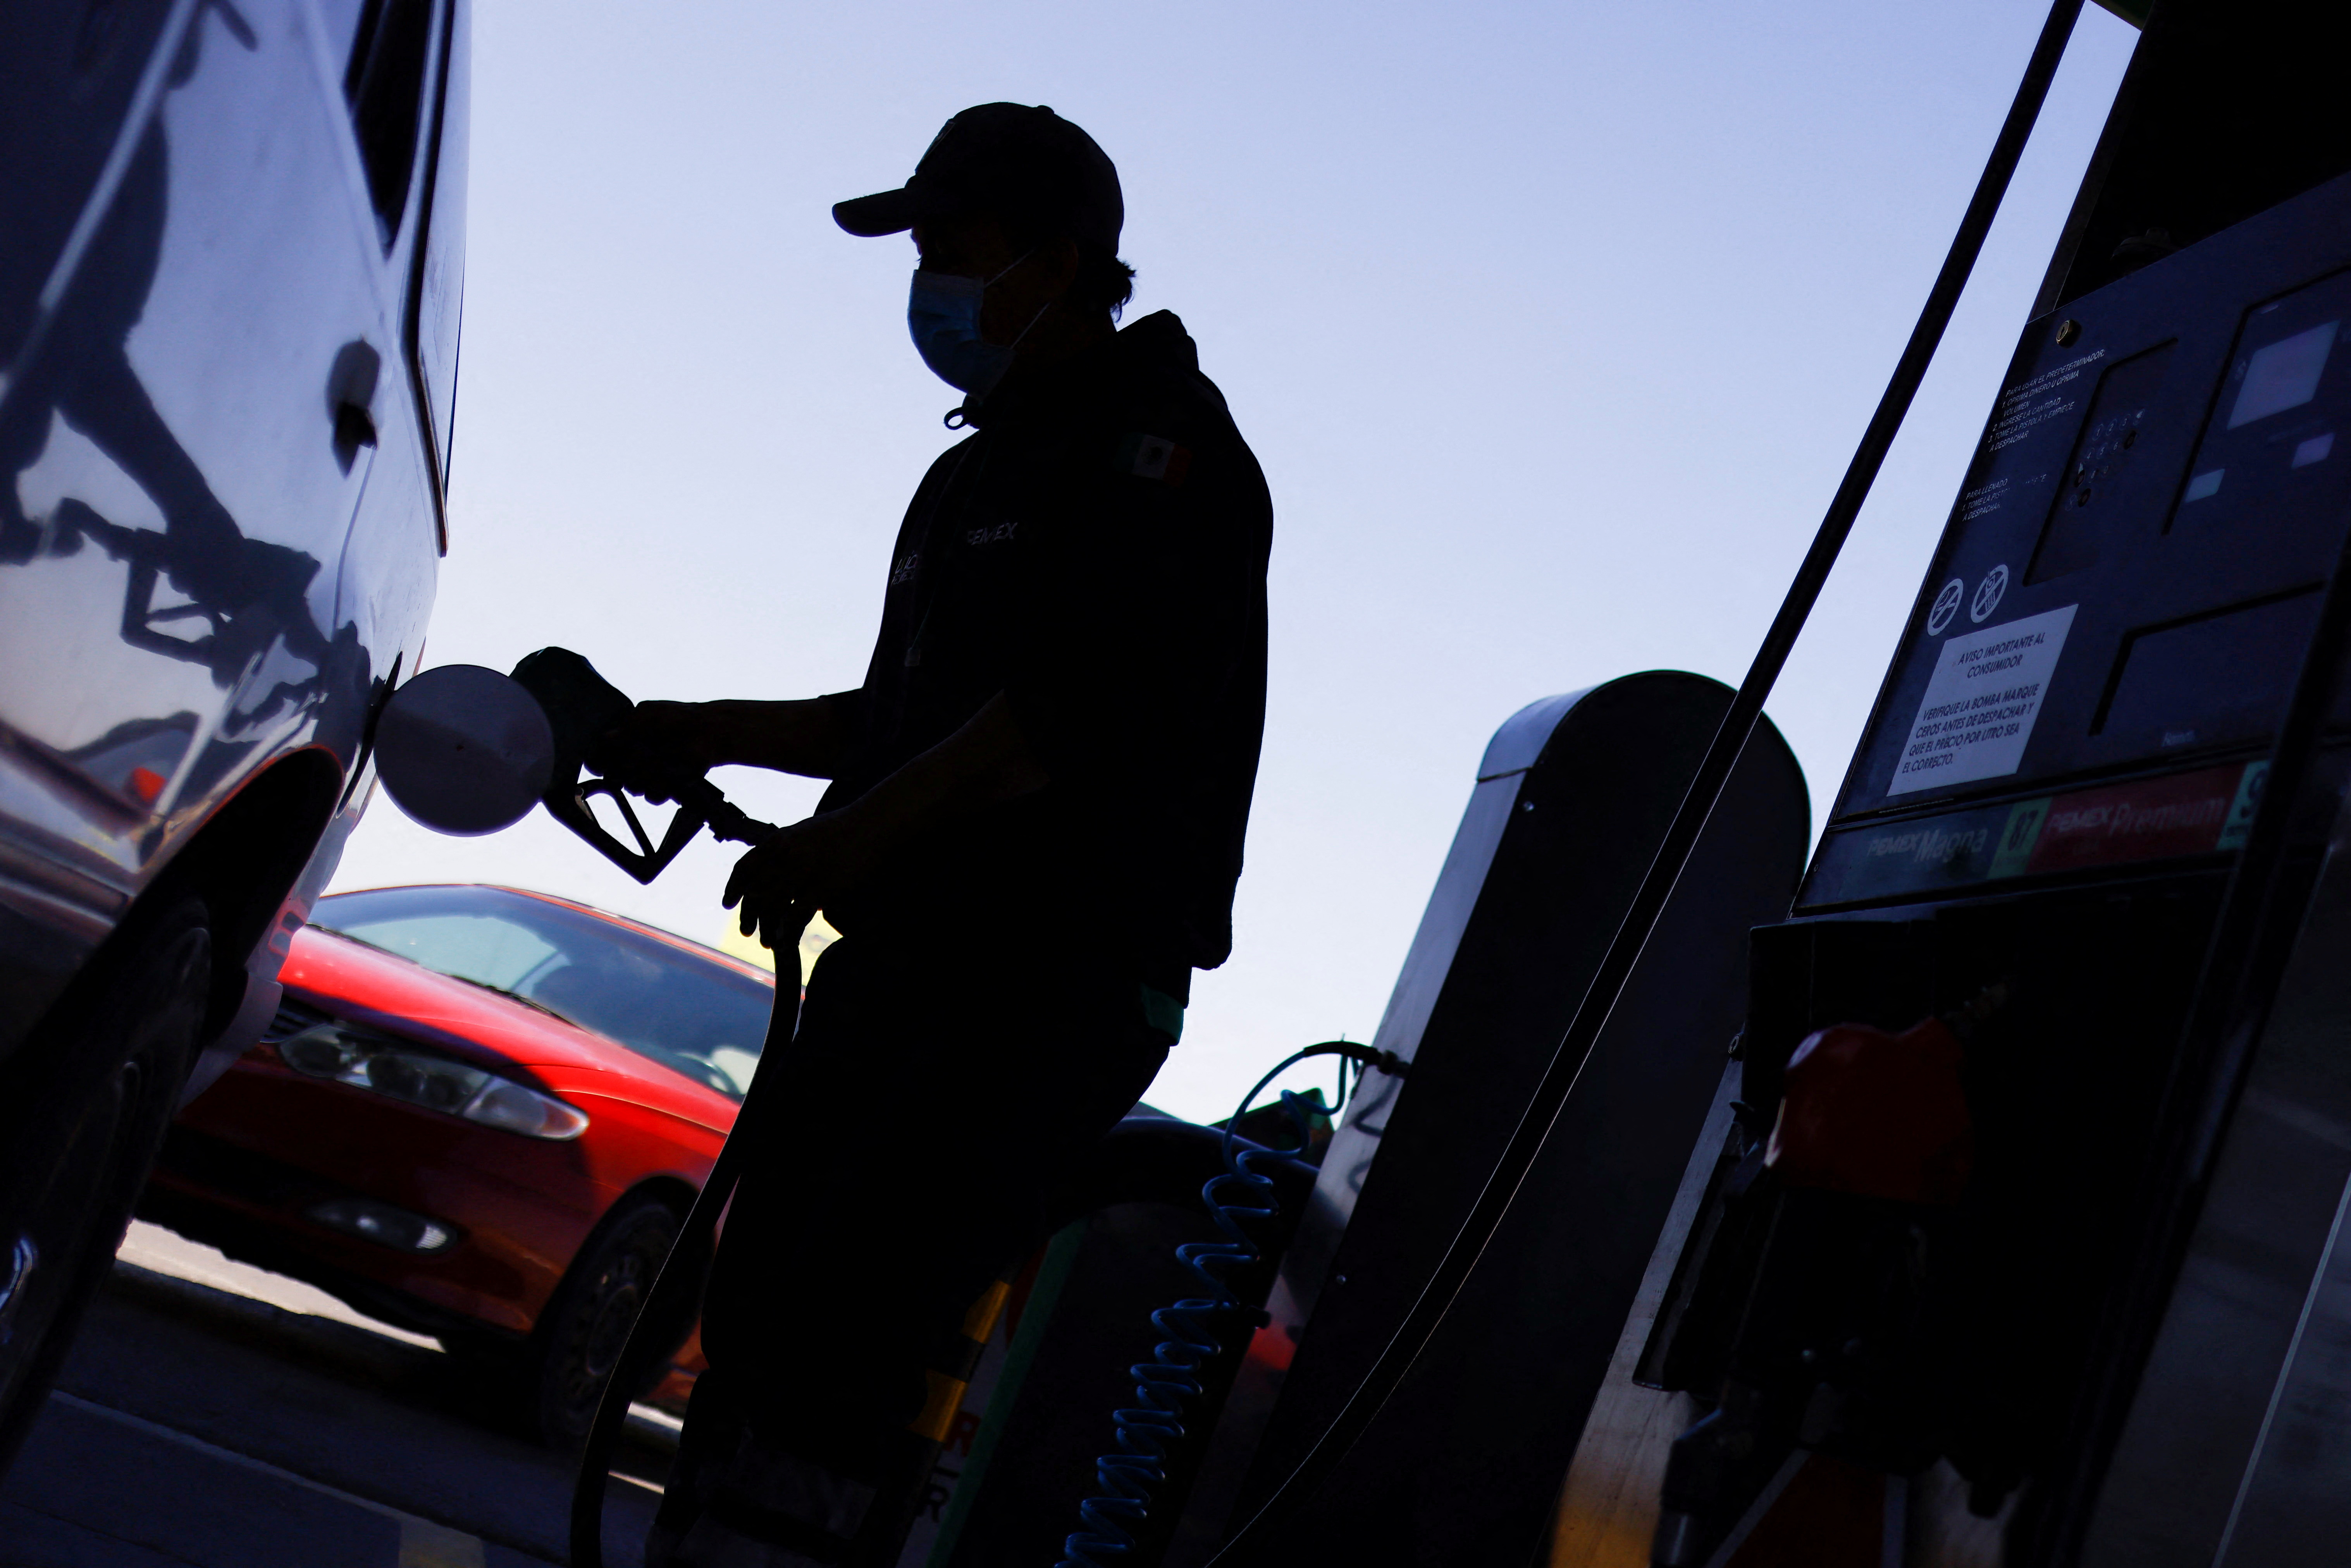 A worker fills a car with gasoline at a service station after Mexico suspended a week of gasoline subsidy along the U.S. border, in Ciudad Juarez, Mexico April 2, 2022. REUTERS/Jose Luis Gonzalez